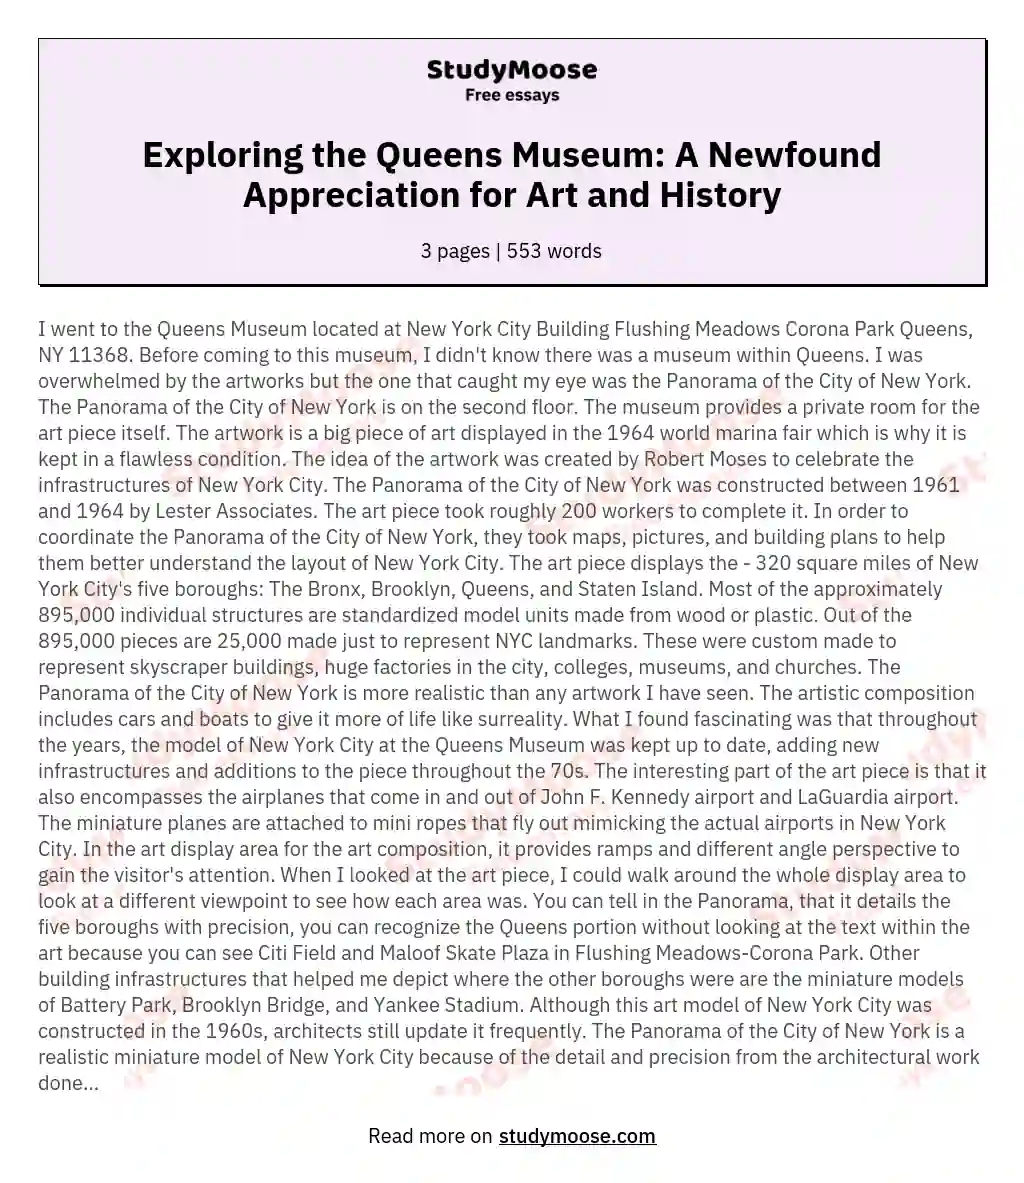 Exploring the Queens Museum: A Newfound Appreciation for Art and History essay